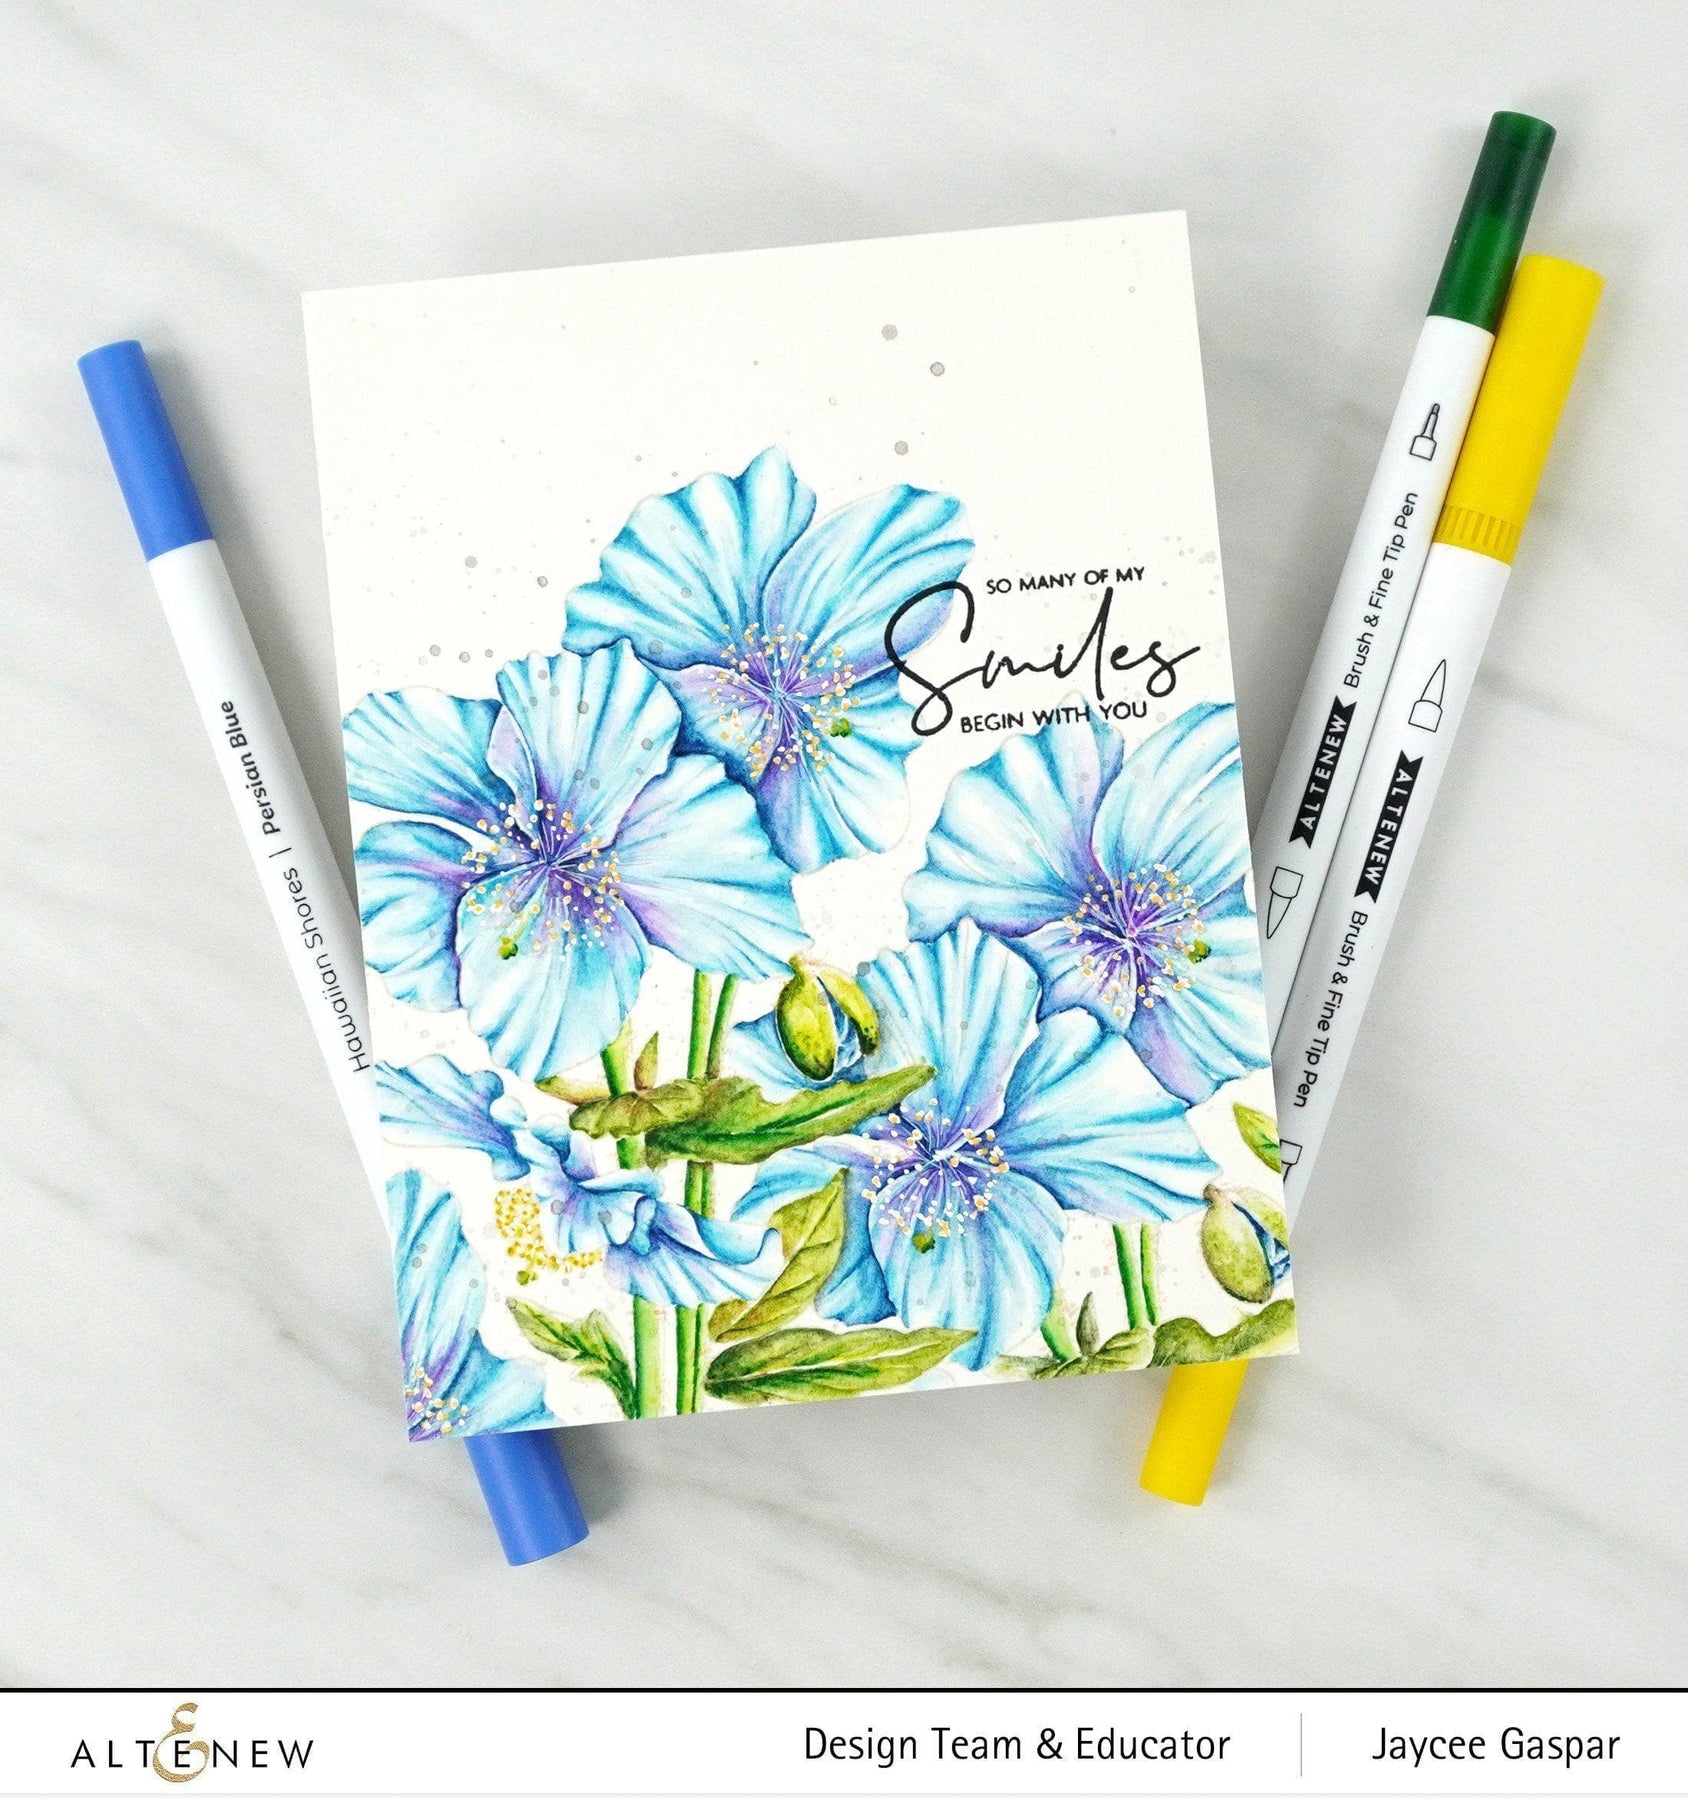 What are the best pens for dot drawing? – Turquoise Gem Home